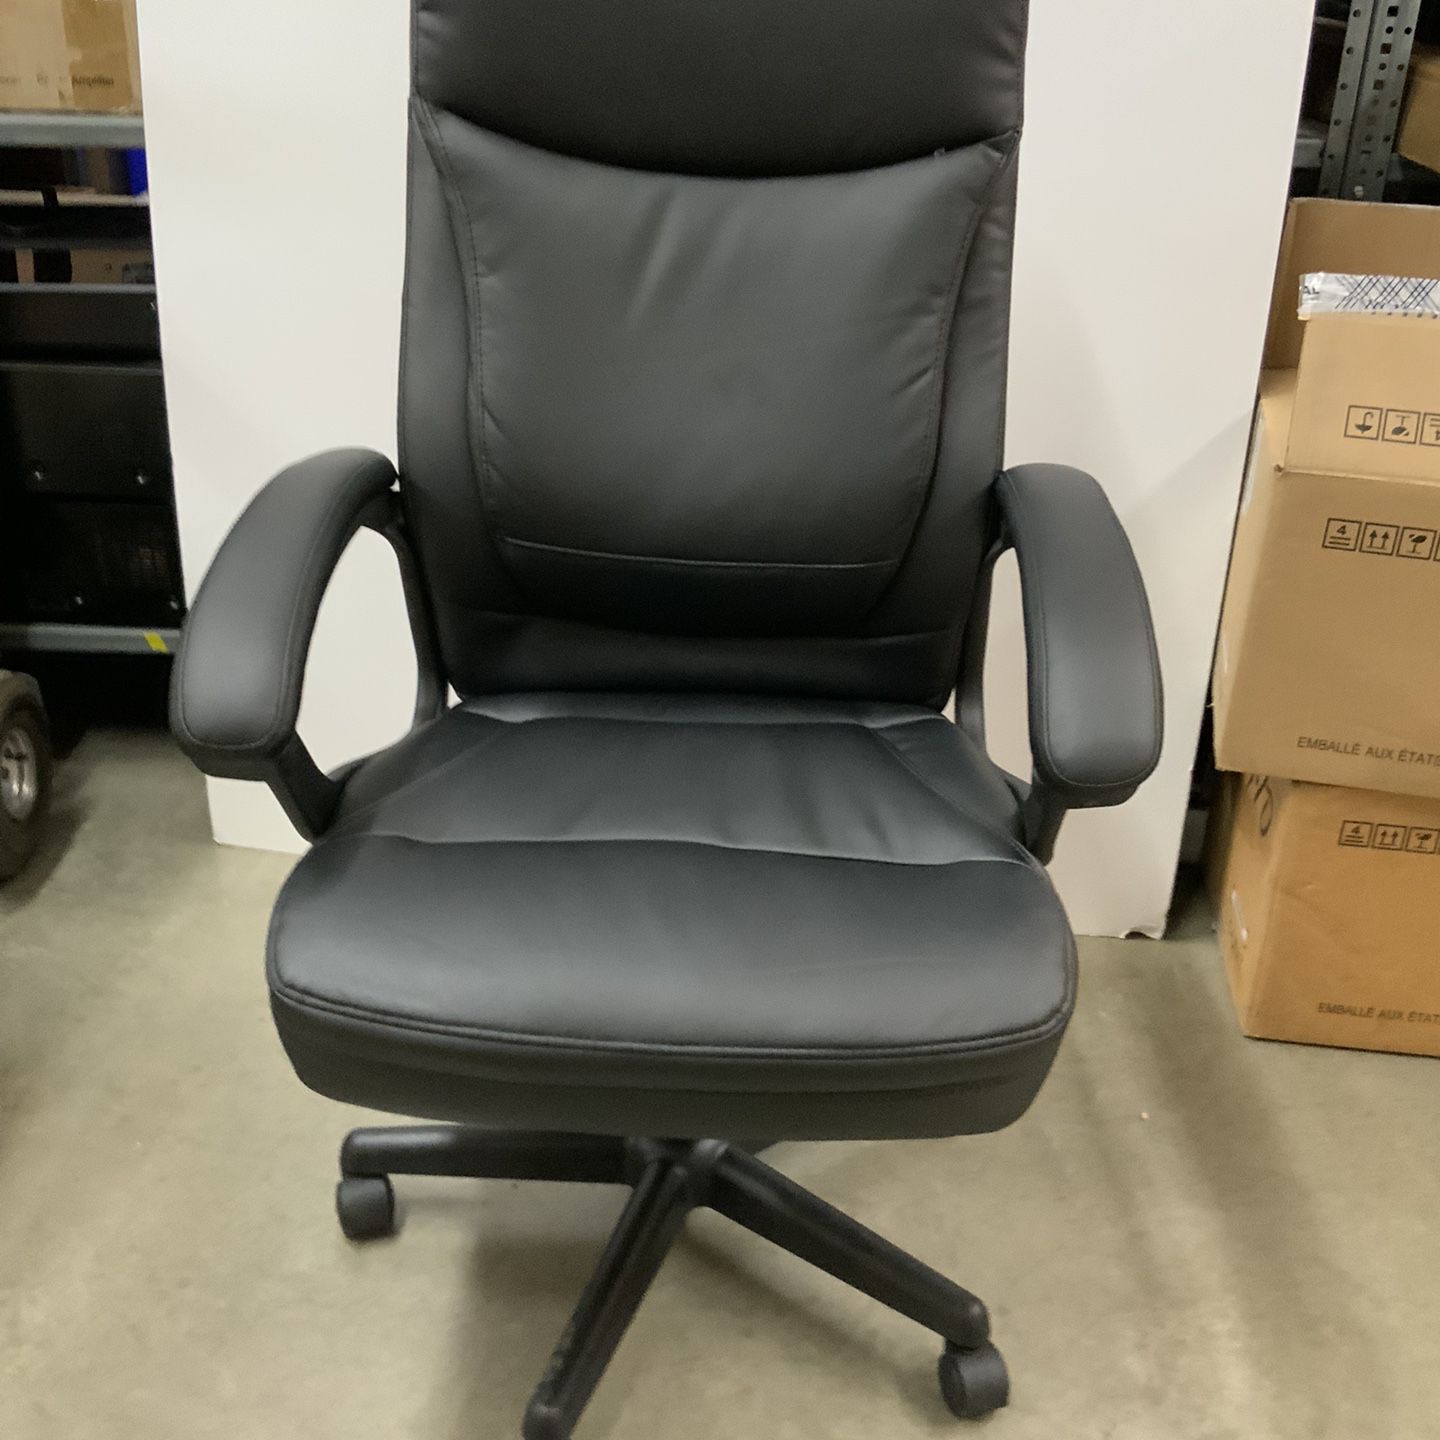 Office Star Products - High-Back Eco Leather Executive Chair - Black  # 641